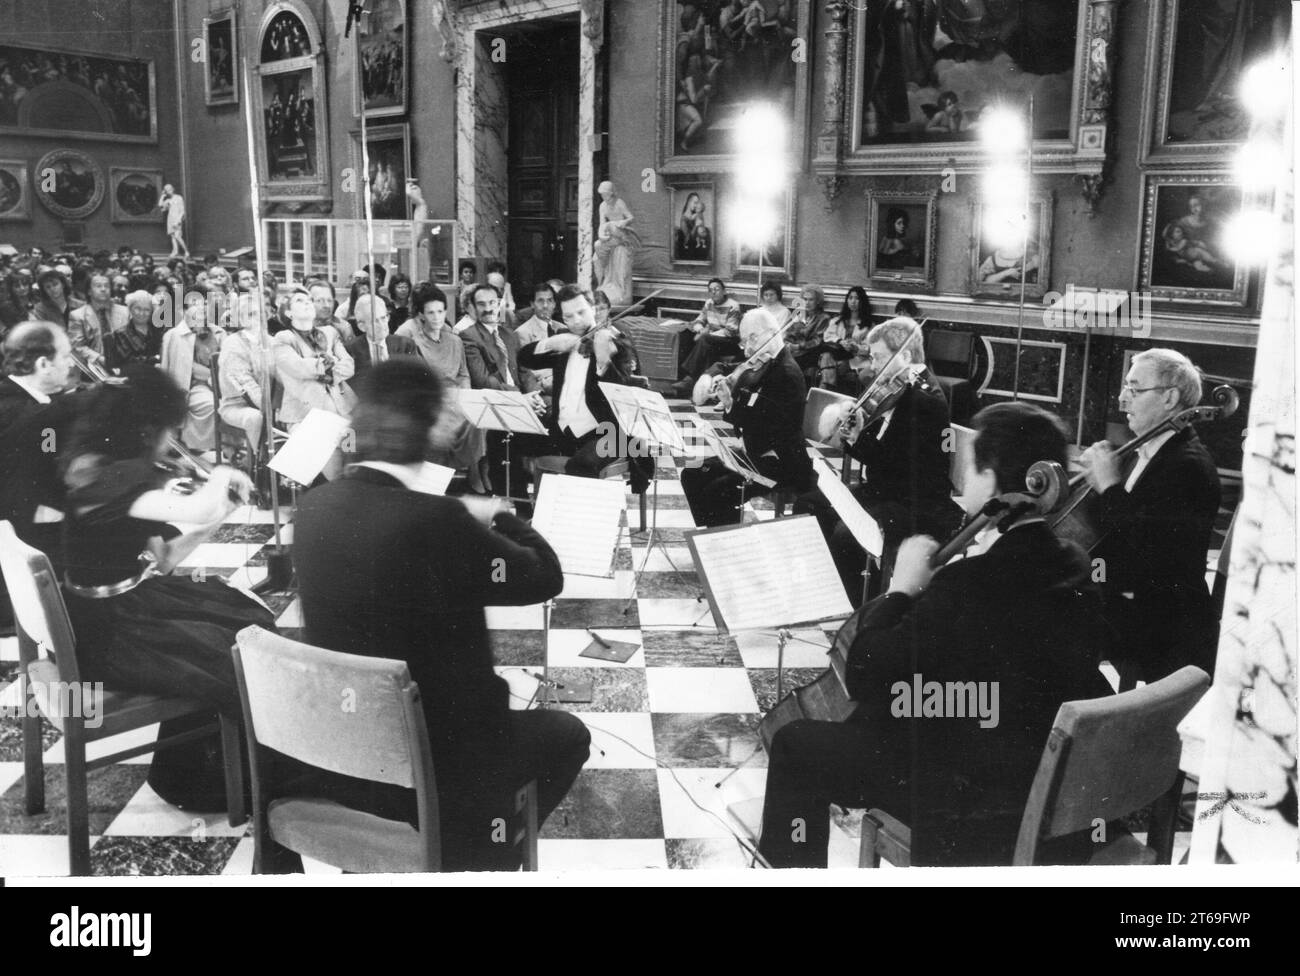 Chamber concert of the strings of the Orchestra of the Beethoven Hall Bonn in the Raffael Hall of the Orangery in Sanssouci. Concert. Music event. Event. Festival. Photo/Michael Hübner, 22.06.1991 [automated translation] Stock Photo